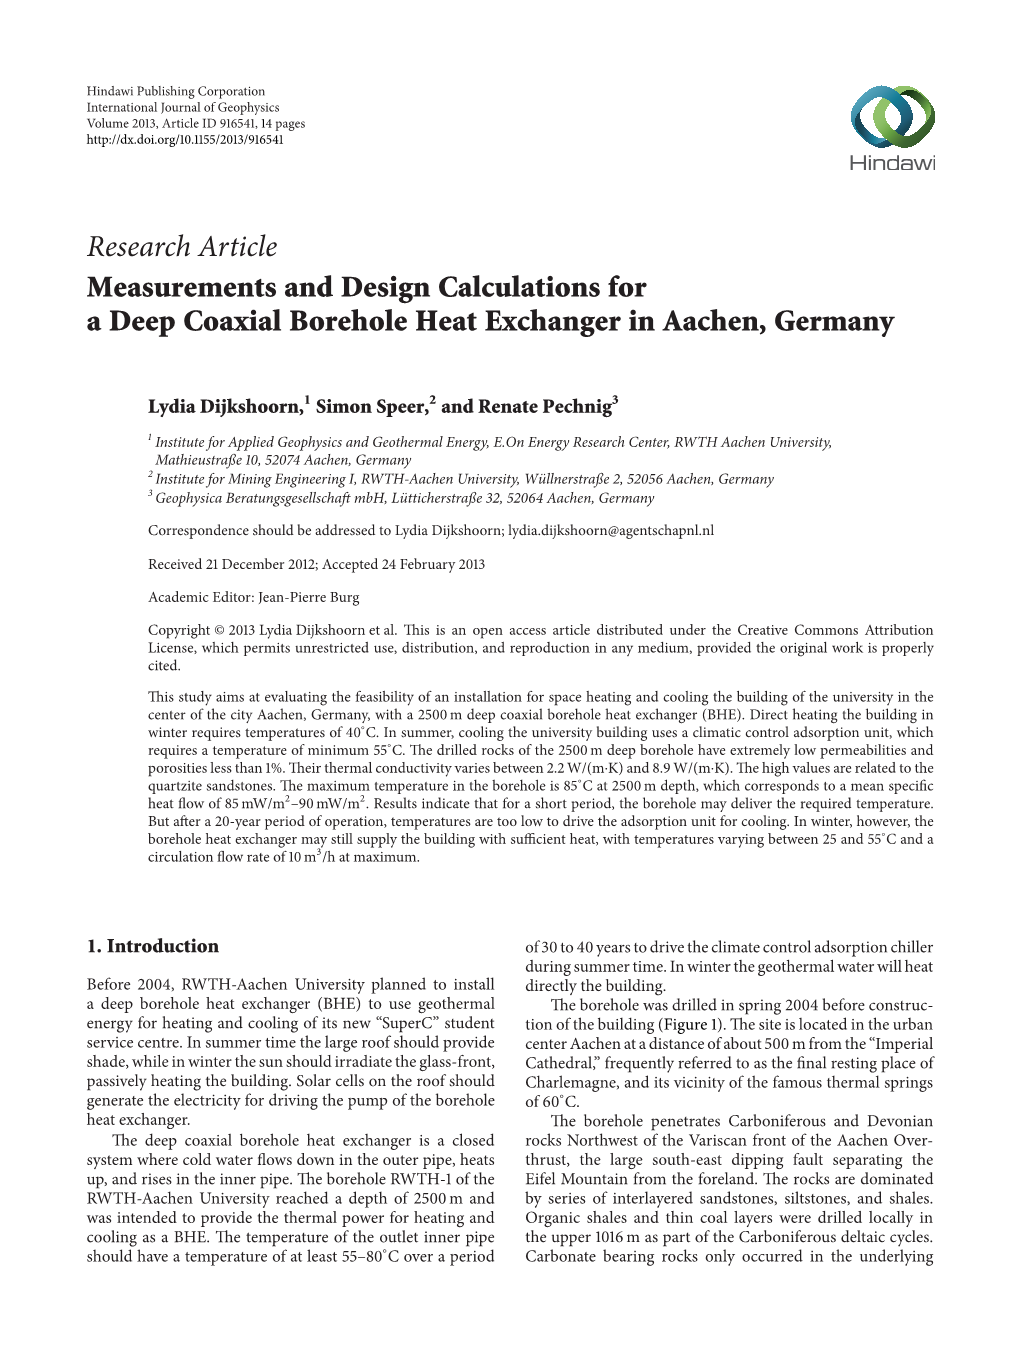 Research Article Measurements and Design Calculations for a Deep Coaxial Borehole Heat Exchanger in Aachen, Germany